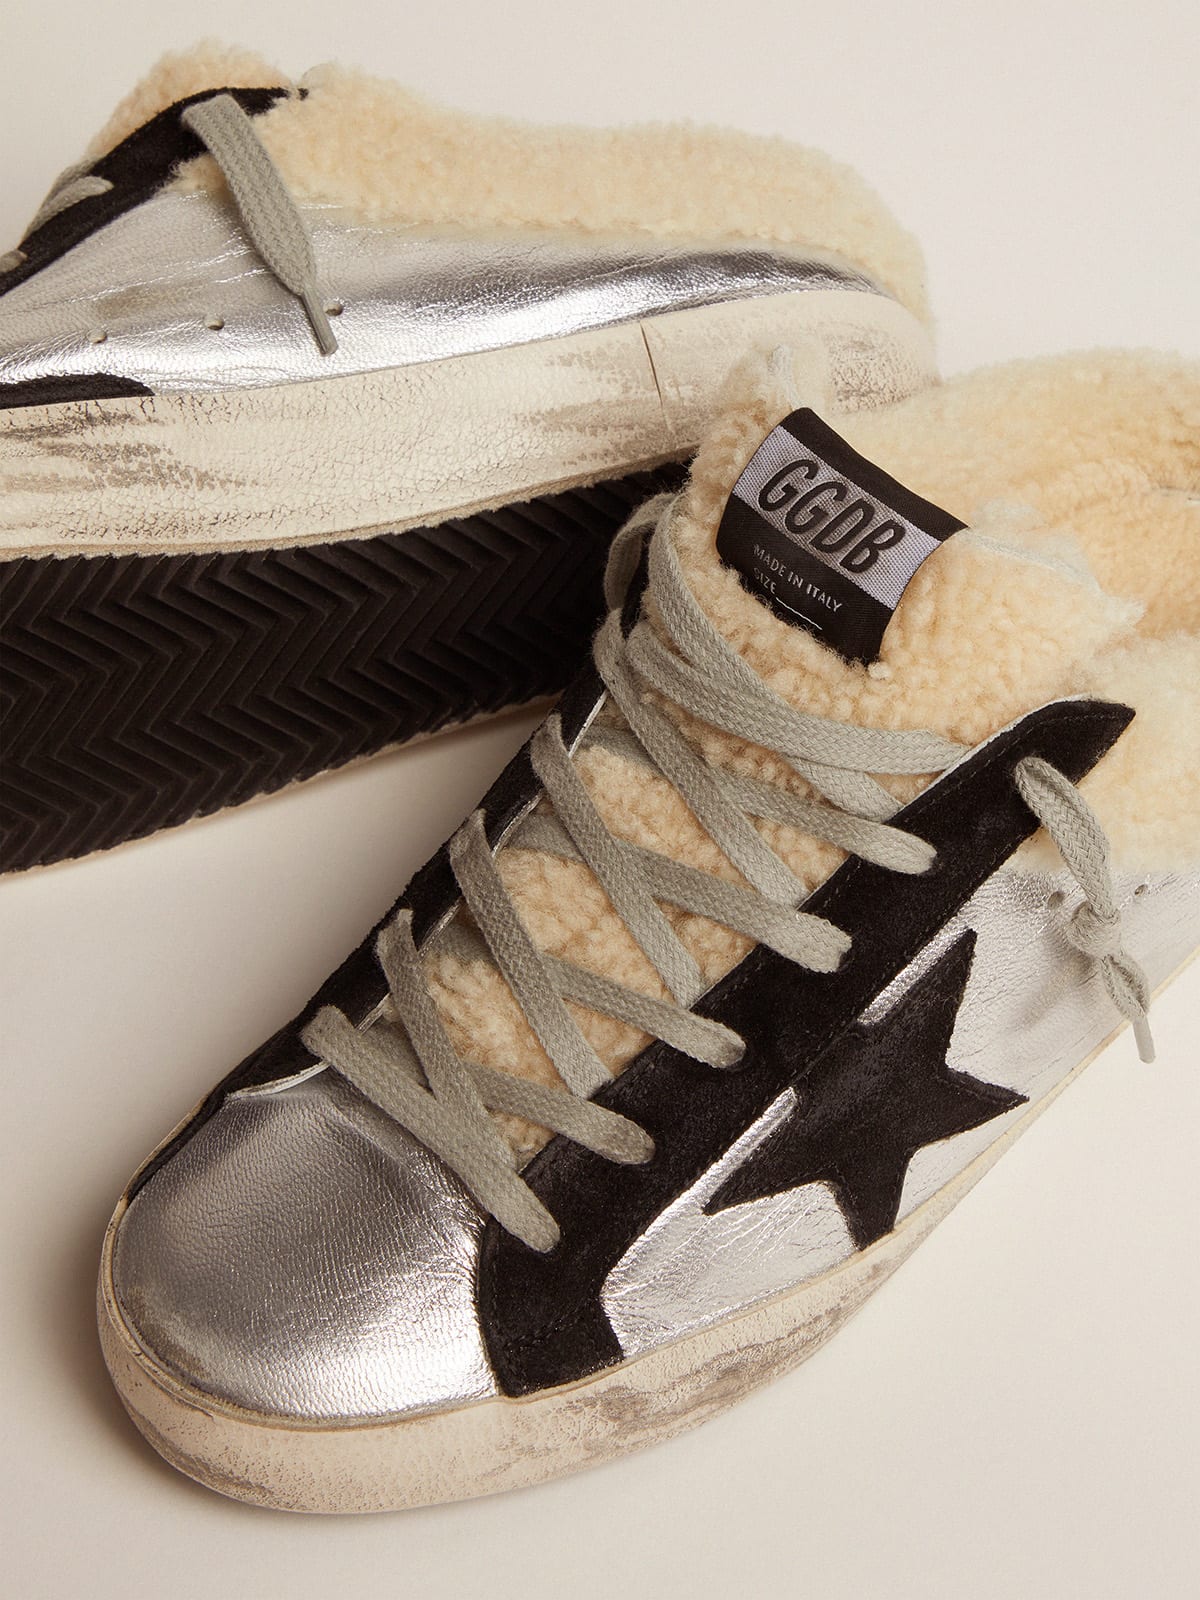 Golden Goose - Super-Star Sabots in silver laminated leather with black suede star in 